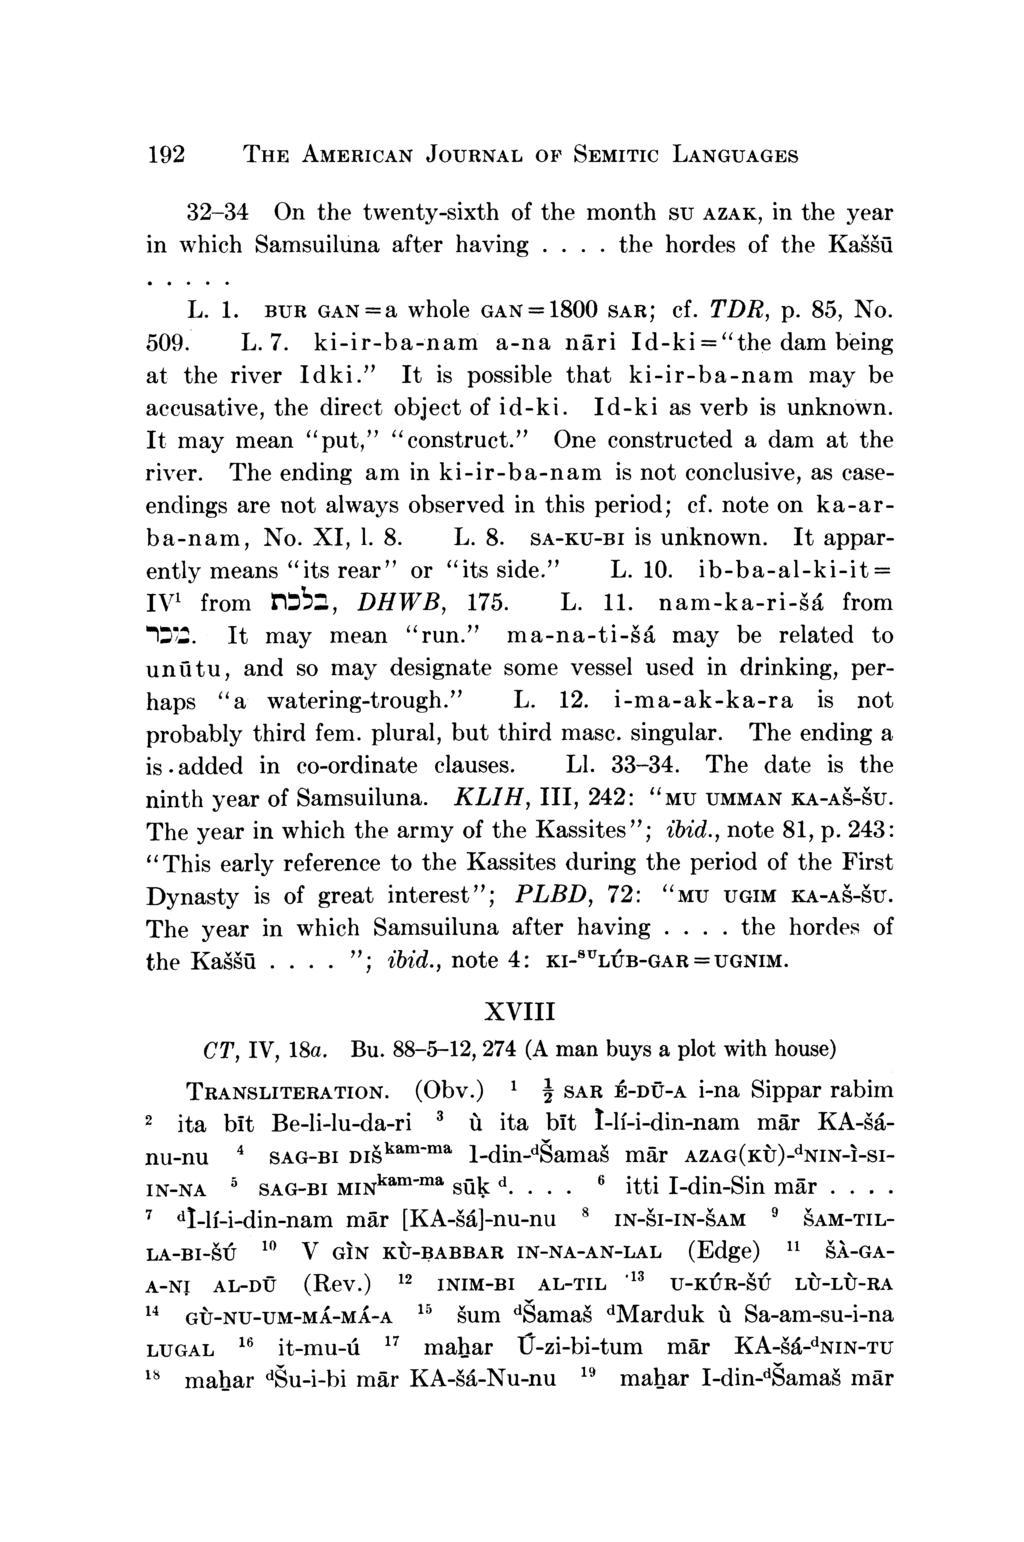 192 THE AMERICAN JOURNAL OF SEMITIC LANGUAGES 32-34 On the twenty-sixth of the month SU AZAK, in the year in which Samsuiluna after having.... the hordes of the Kafii L. 1. BUR GAN =a whole SAR; cf.